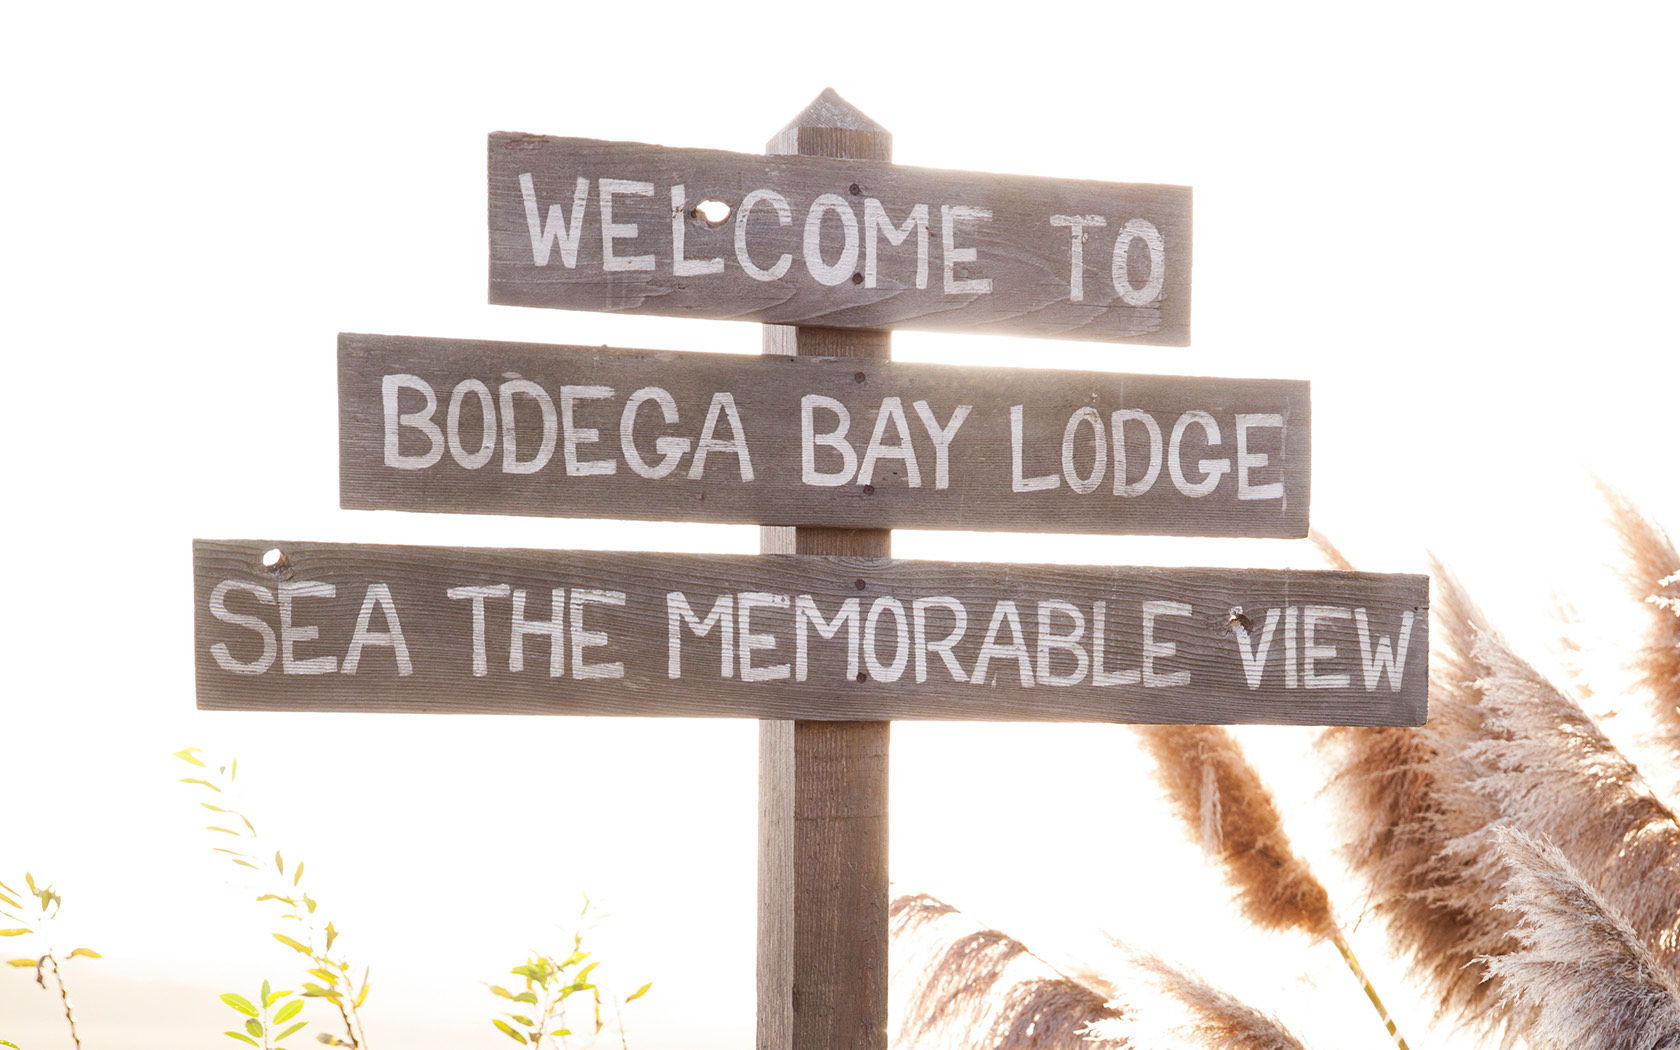 View of the bodega bay sign at the beach